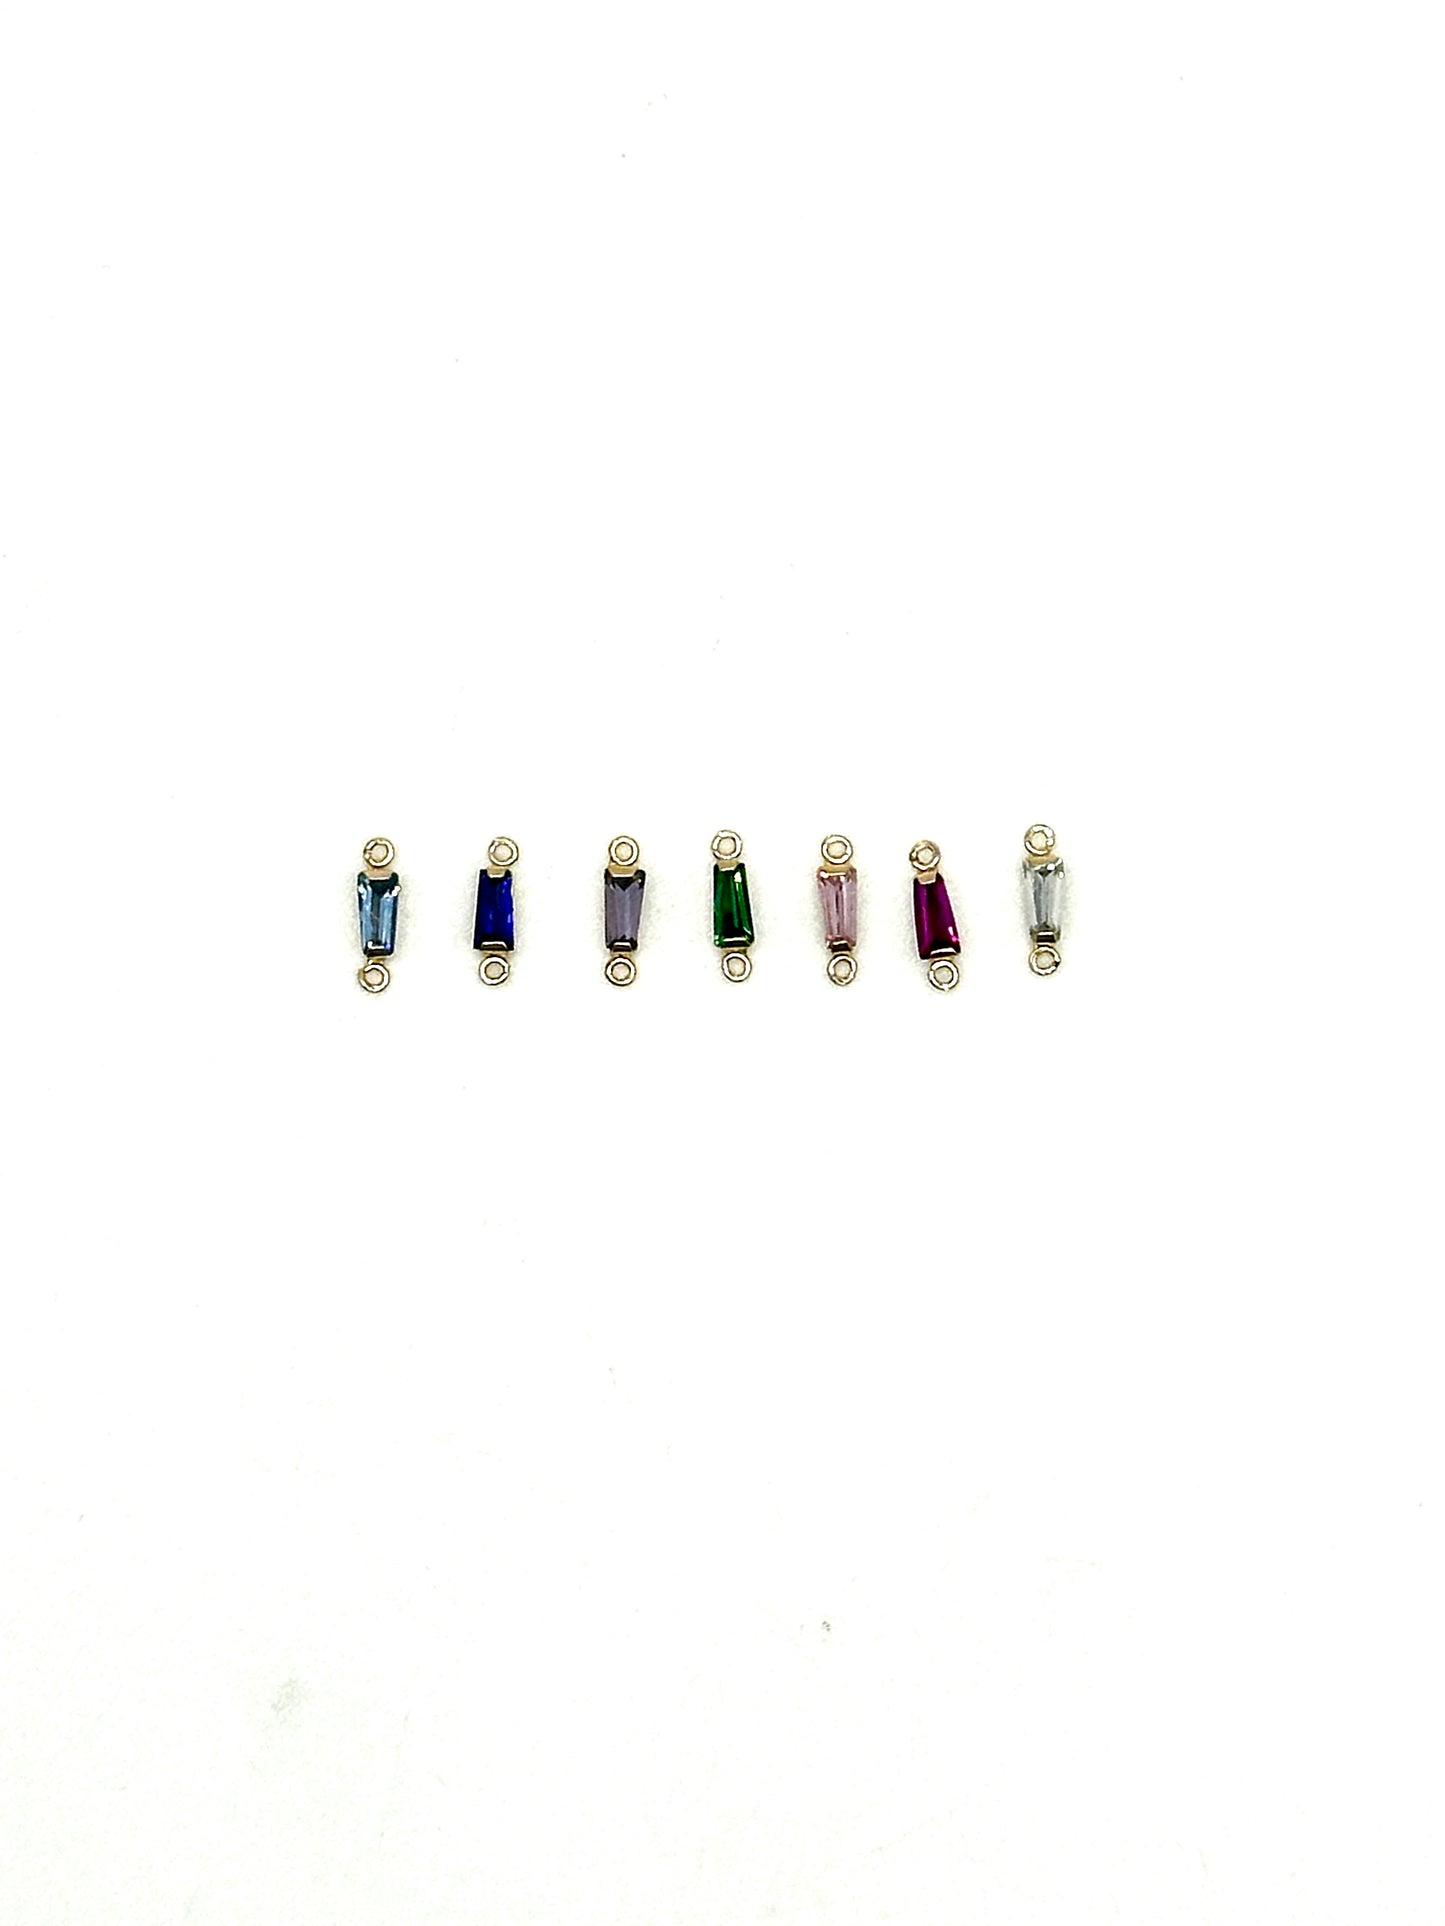 Trapezoid Cut Prong Set Gemstone Connector